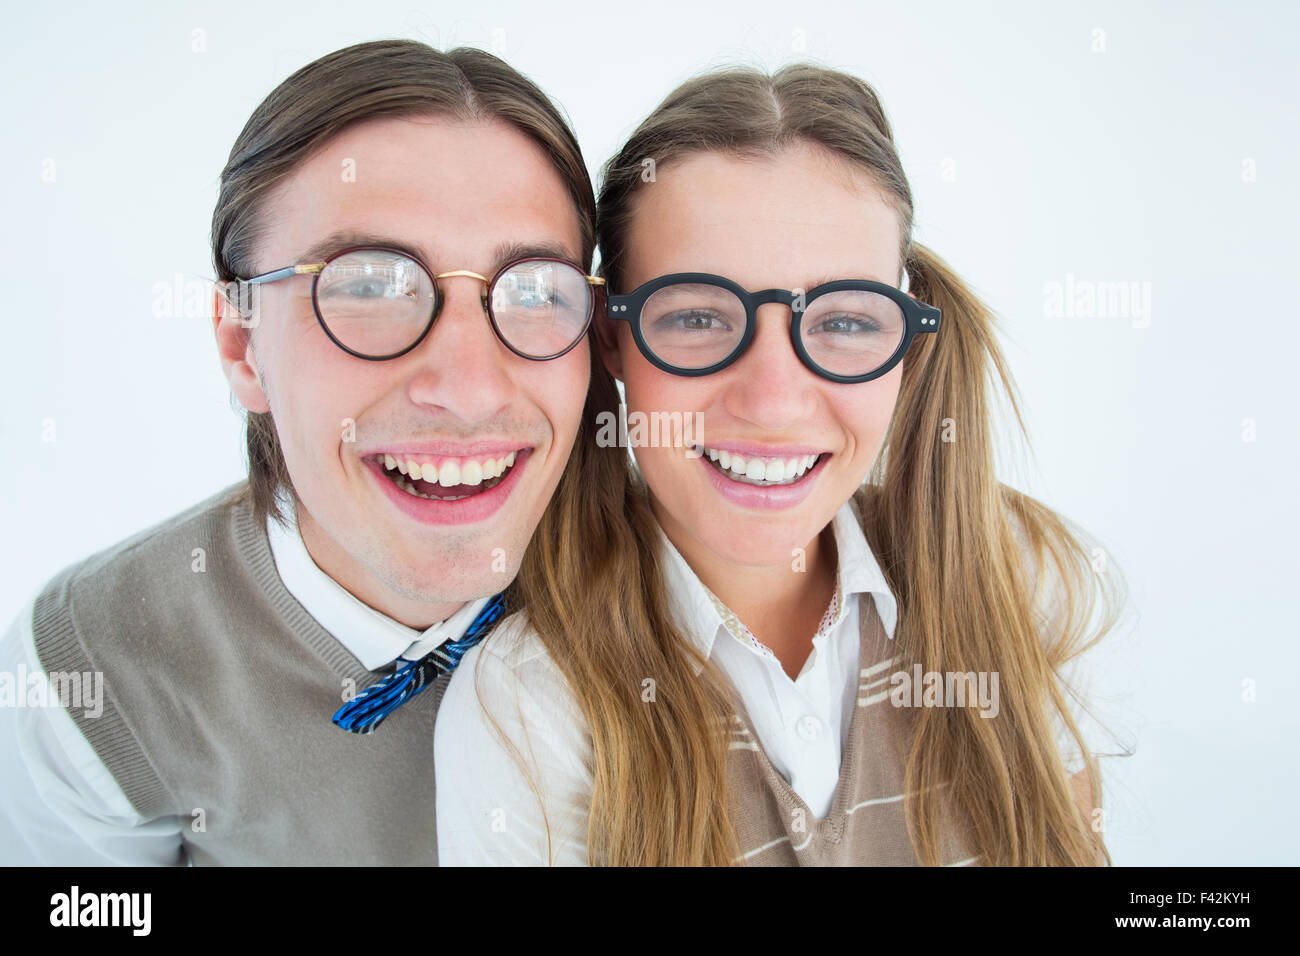 Geeky hipsters smiling at camera Stock Photo